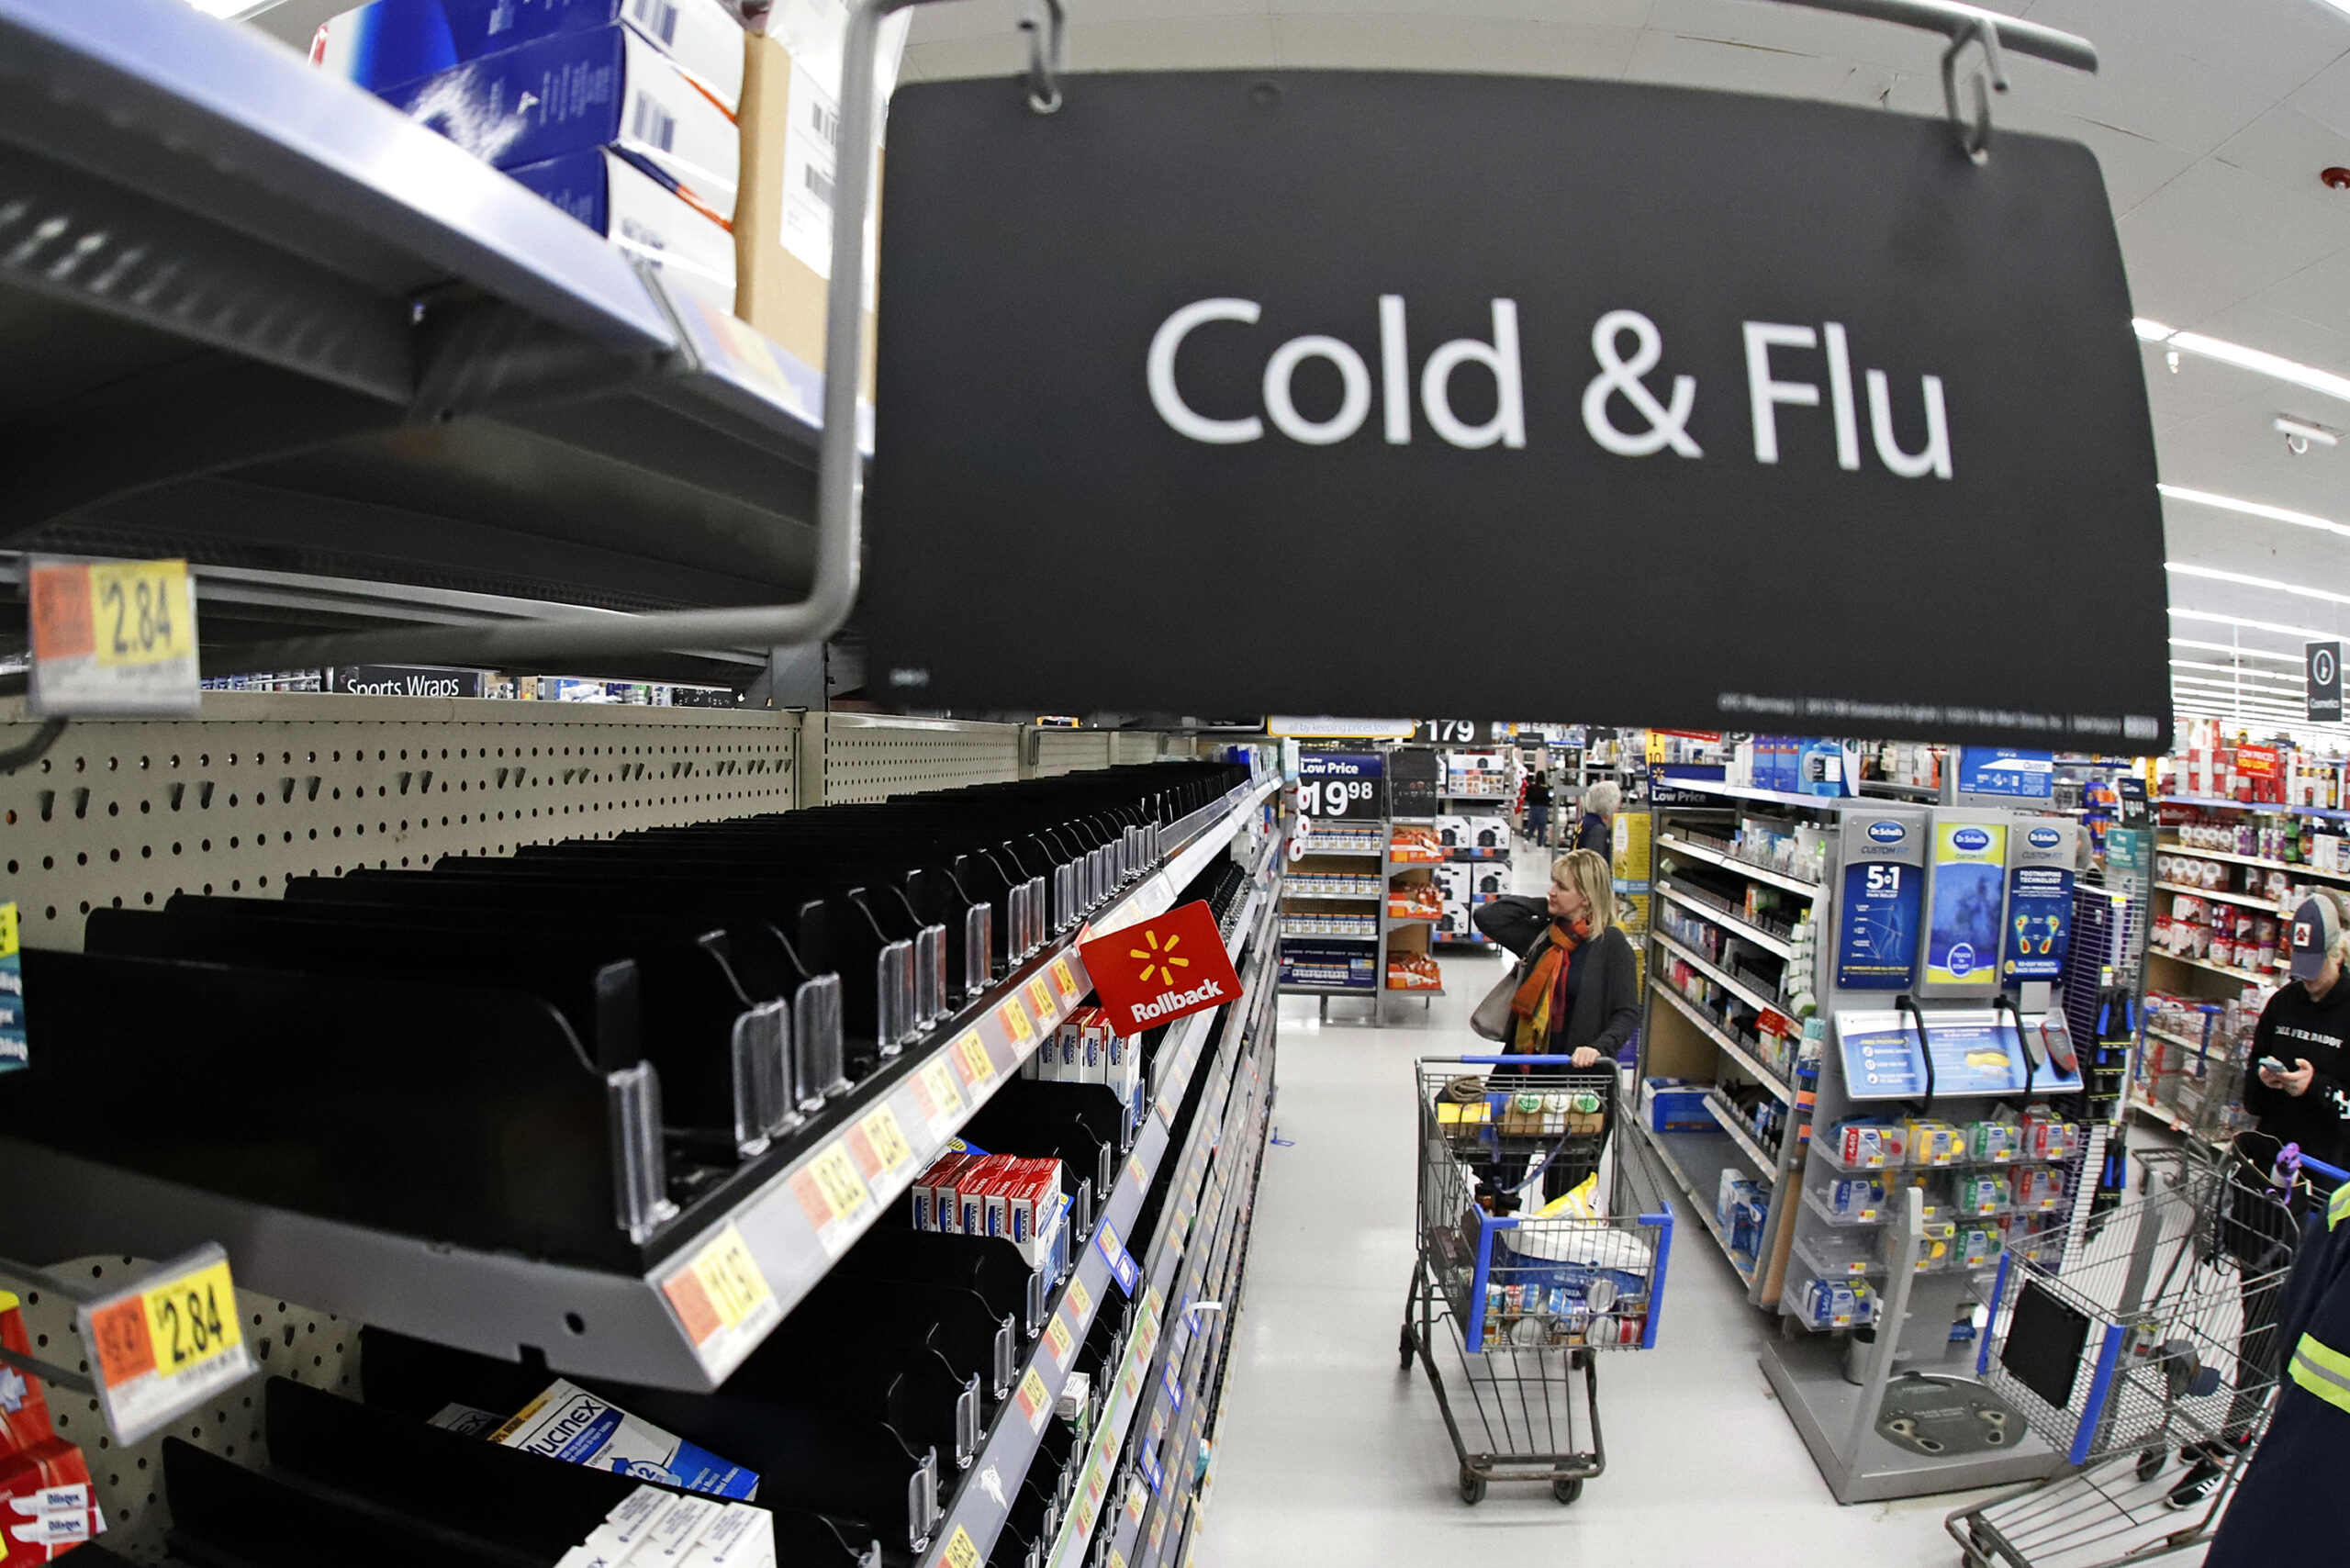 A shopper in the cold and flu aisle of a Walmart